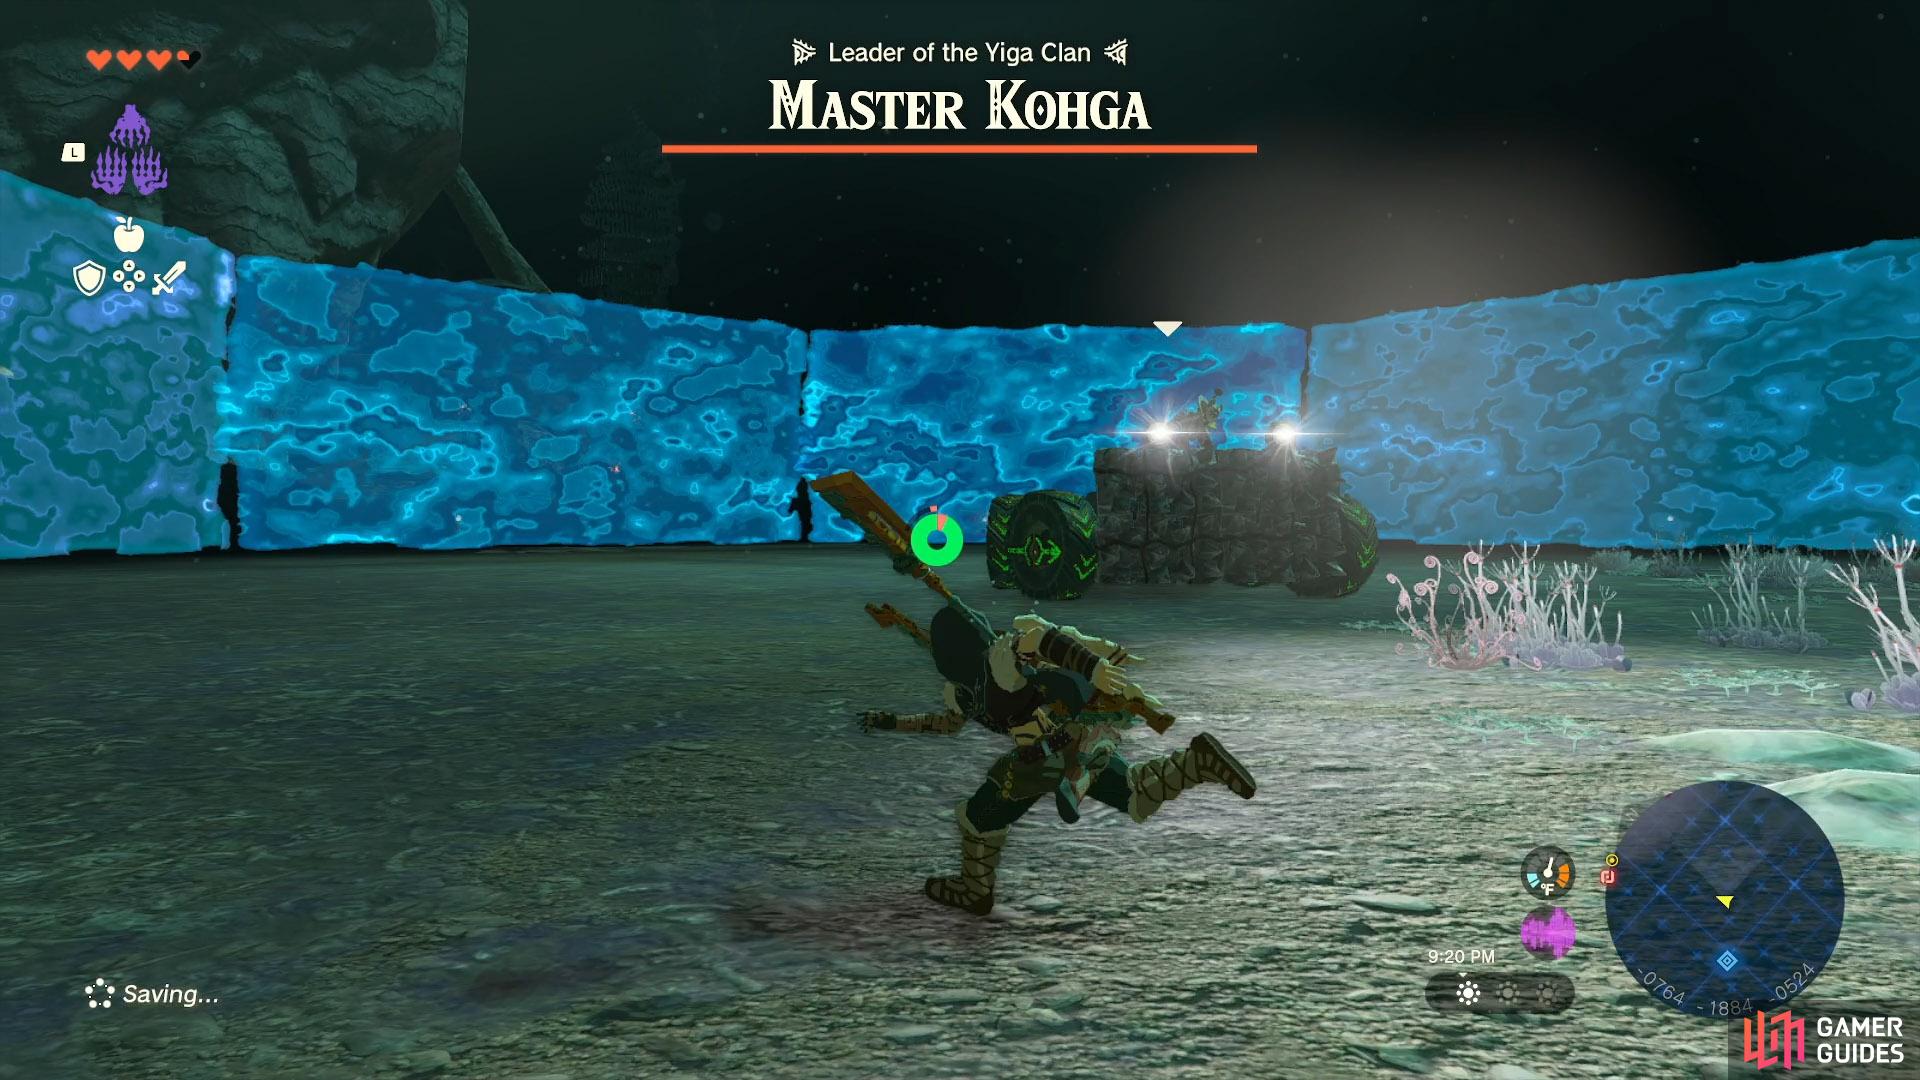 Master Kohga’s vehicle in action